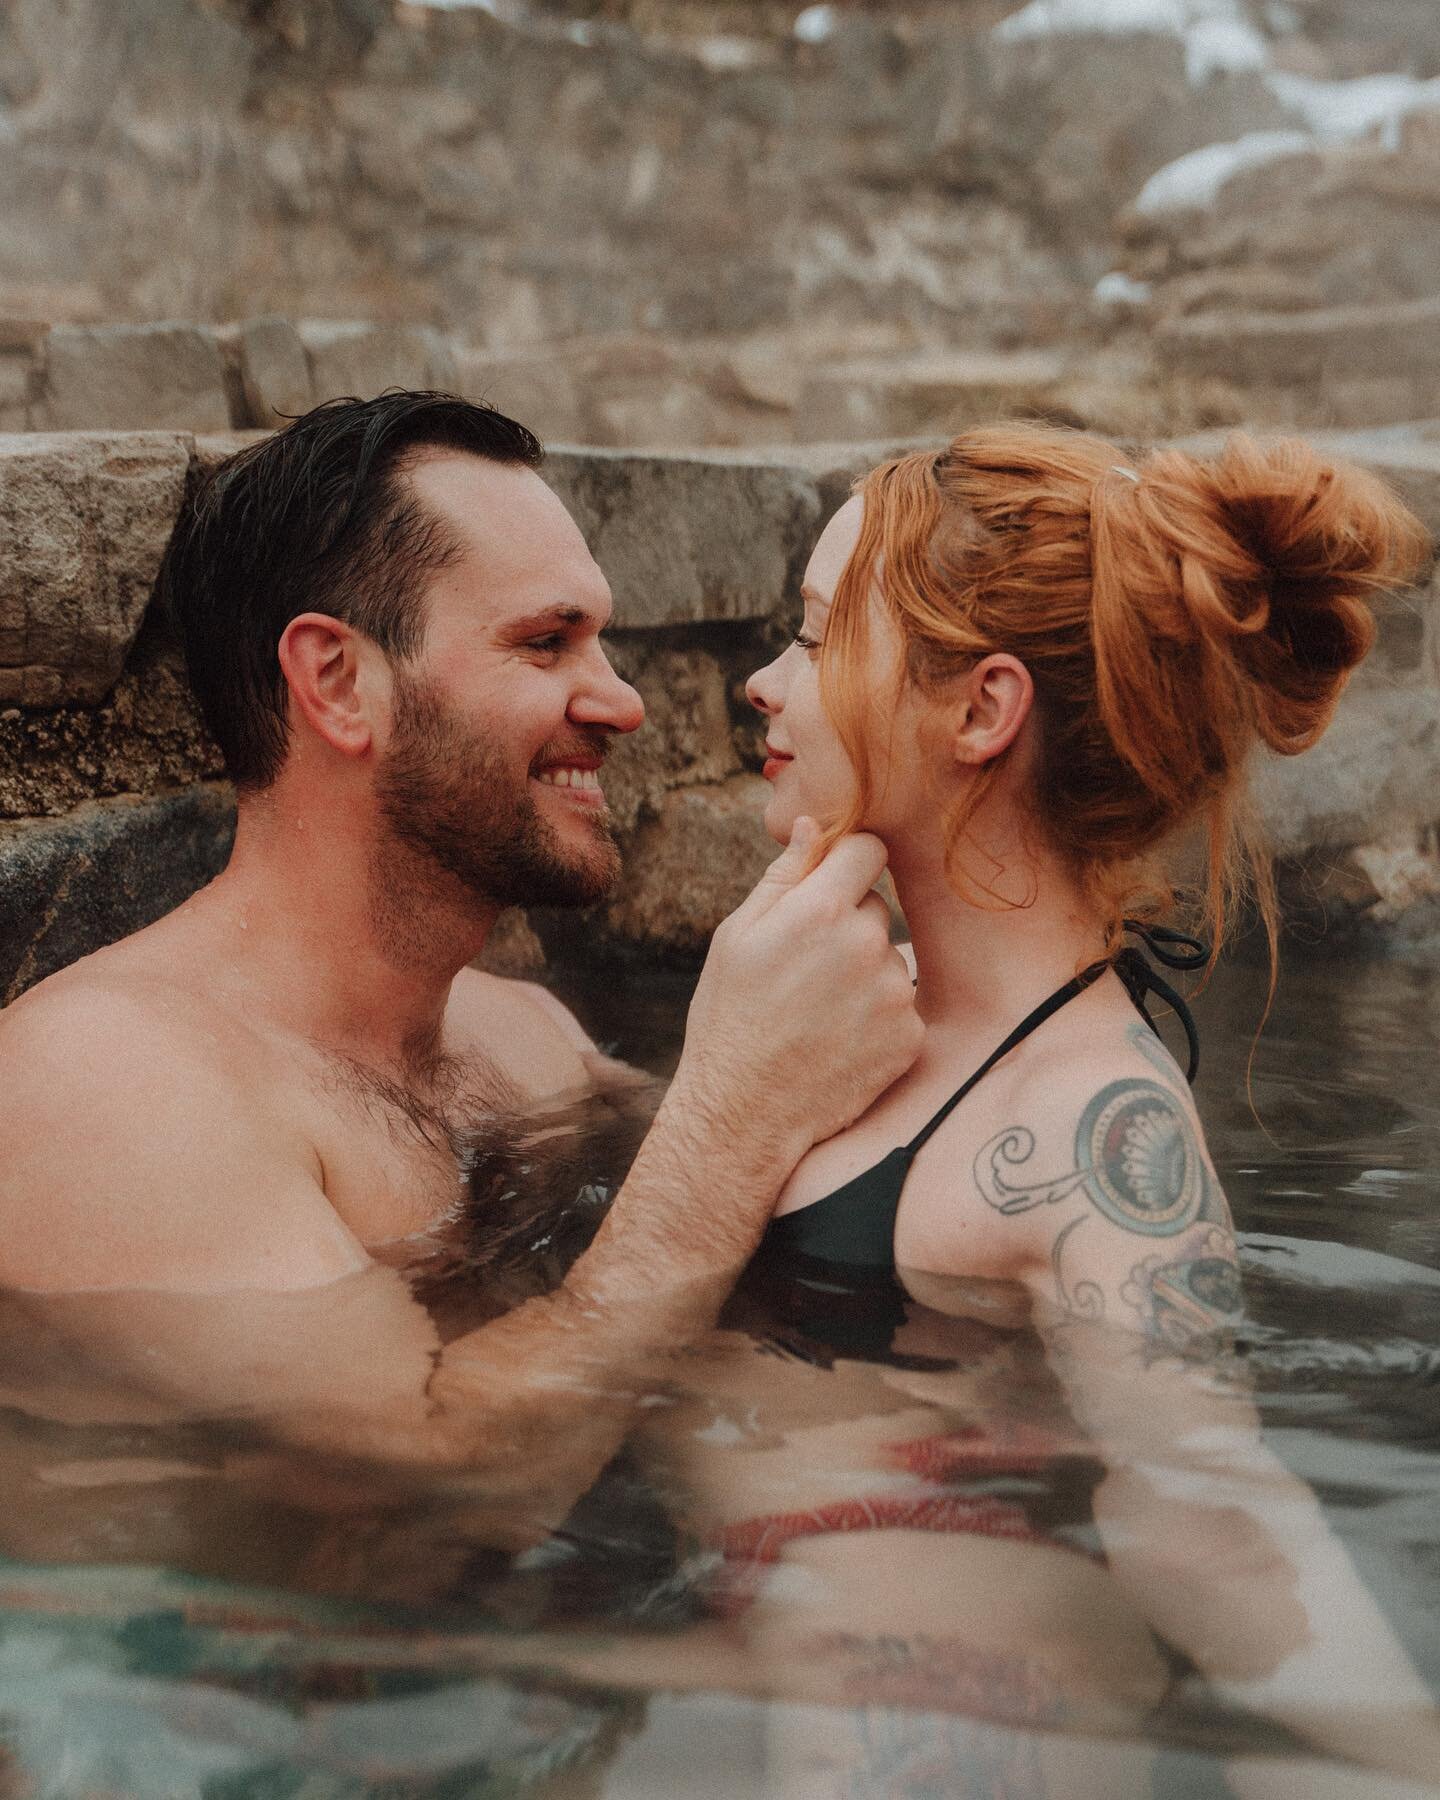 I haven&rsquo;t posted about this trip, but I&rsquo;ve been out in Colorado for the week! Today we took a break from snowboarding to see the hot springs and did a mini photo session with some new friends! 

.
.
.
.
#firstandlasts #weddingphotographer